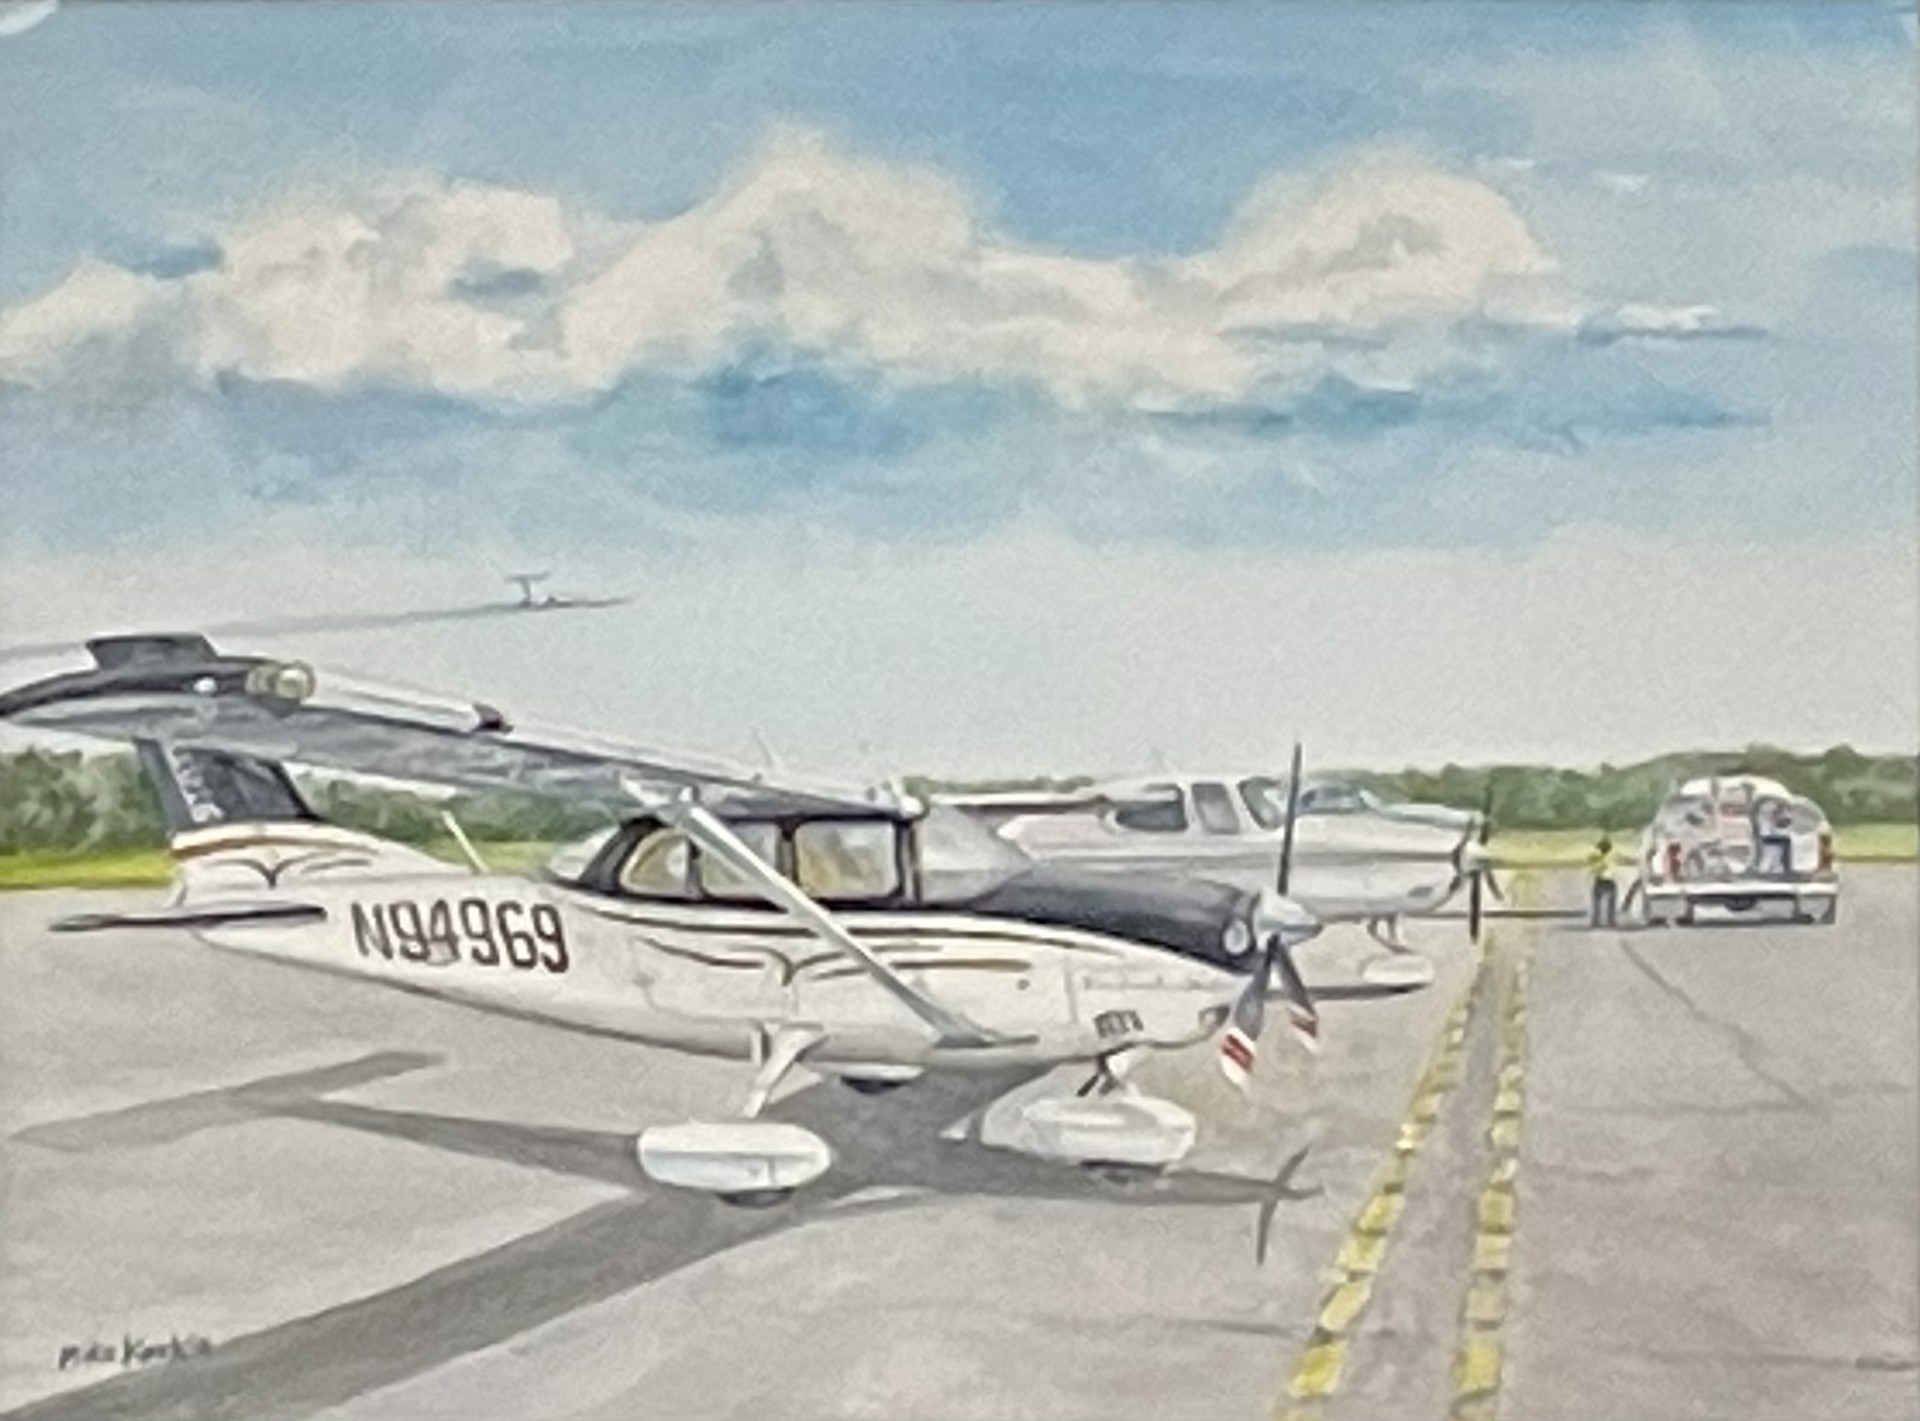 Refueling Standby by Mike Koskie